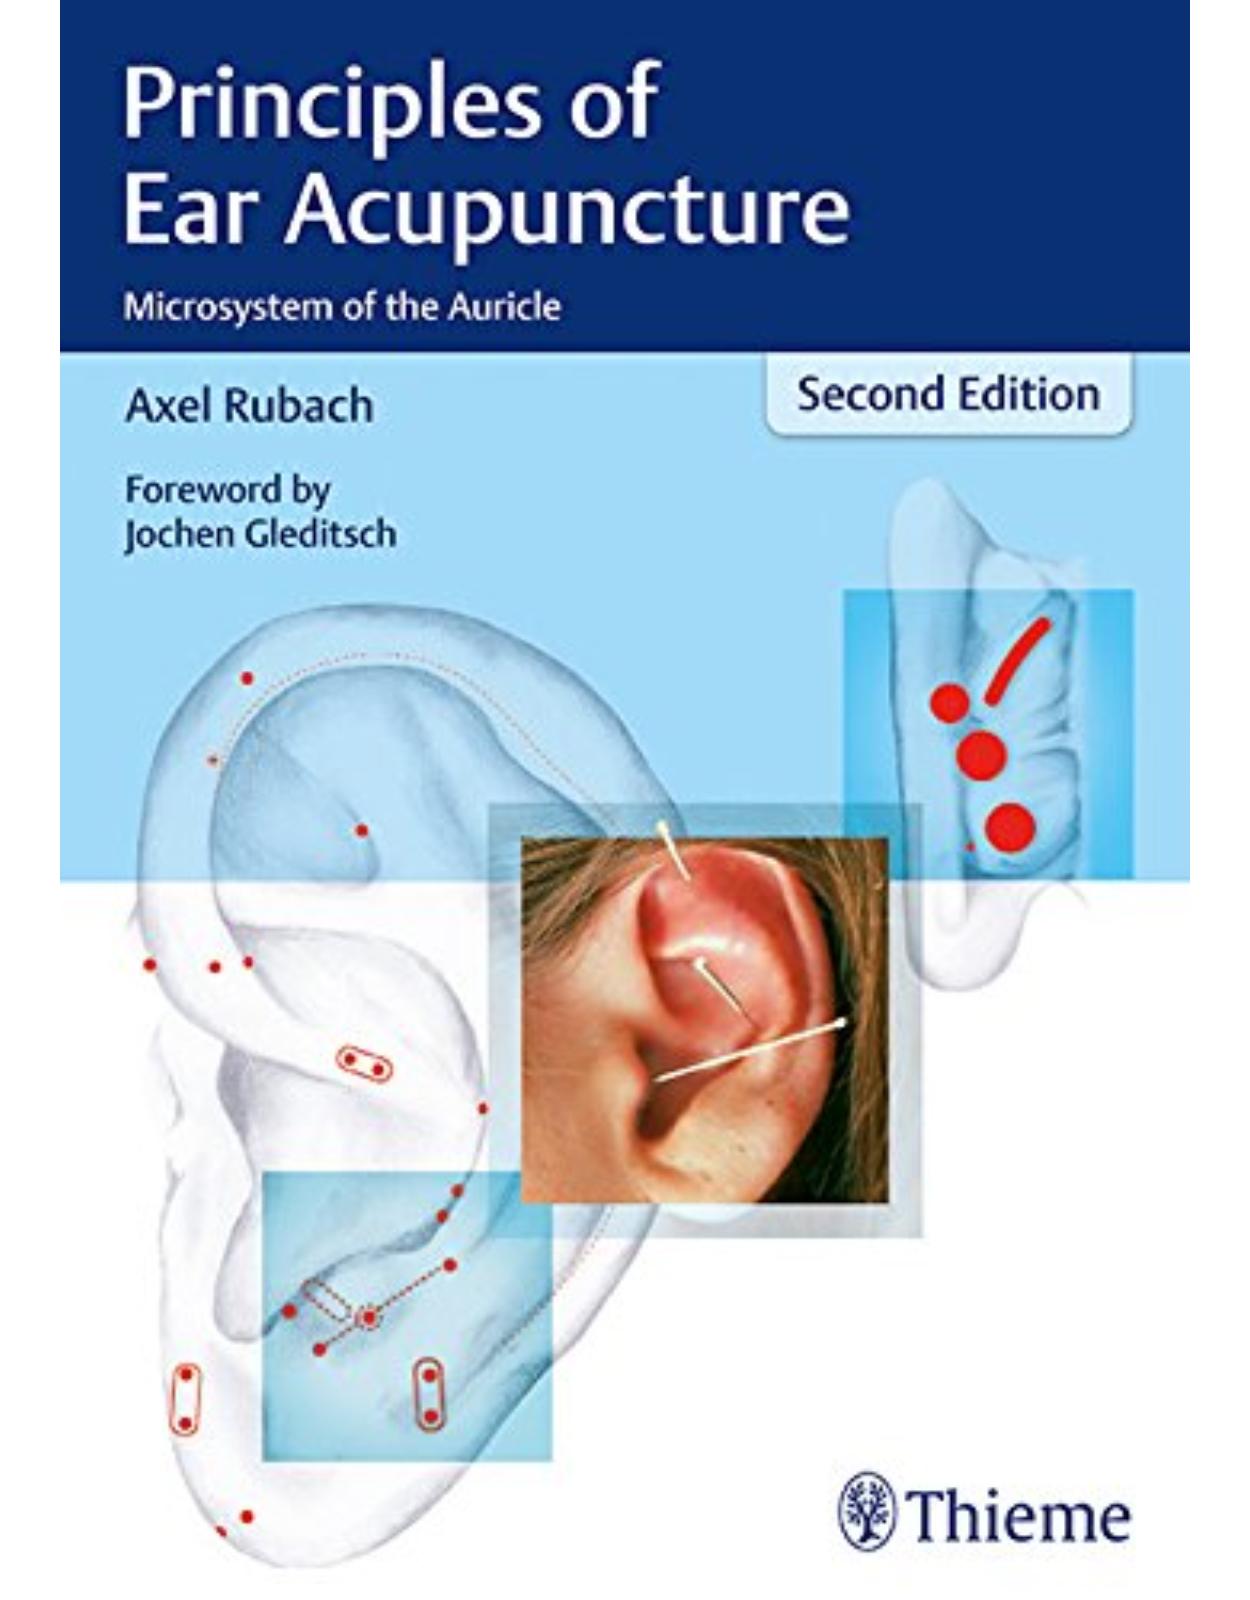  Principles of Ear Acupuncture